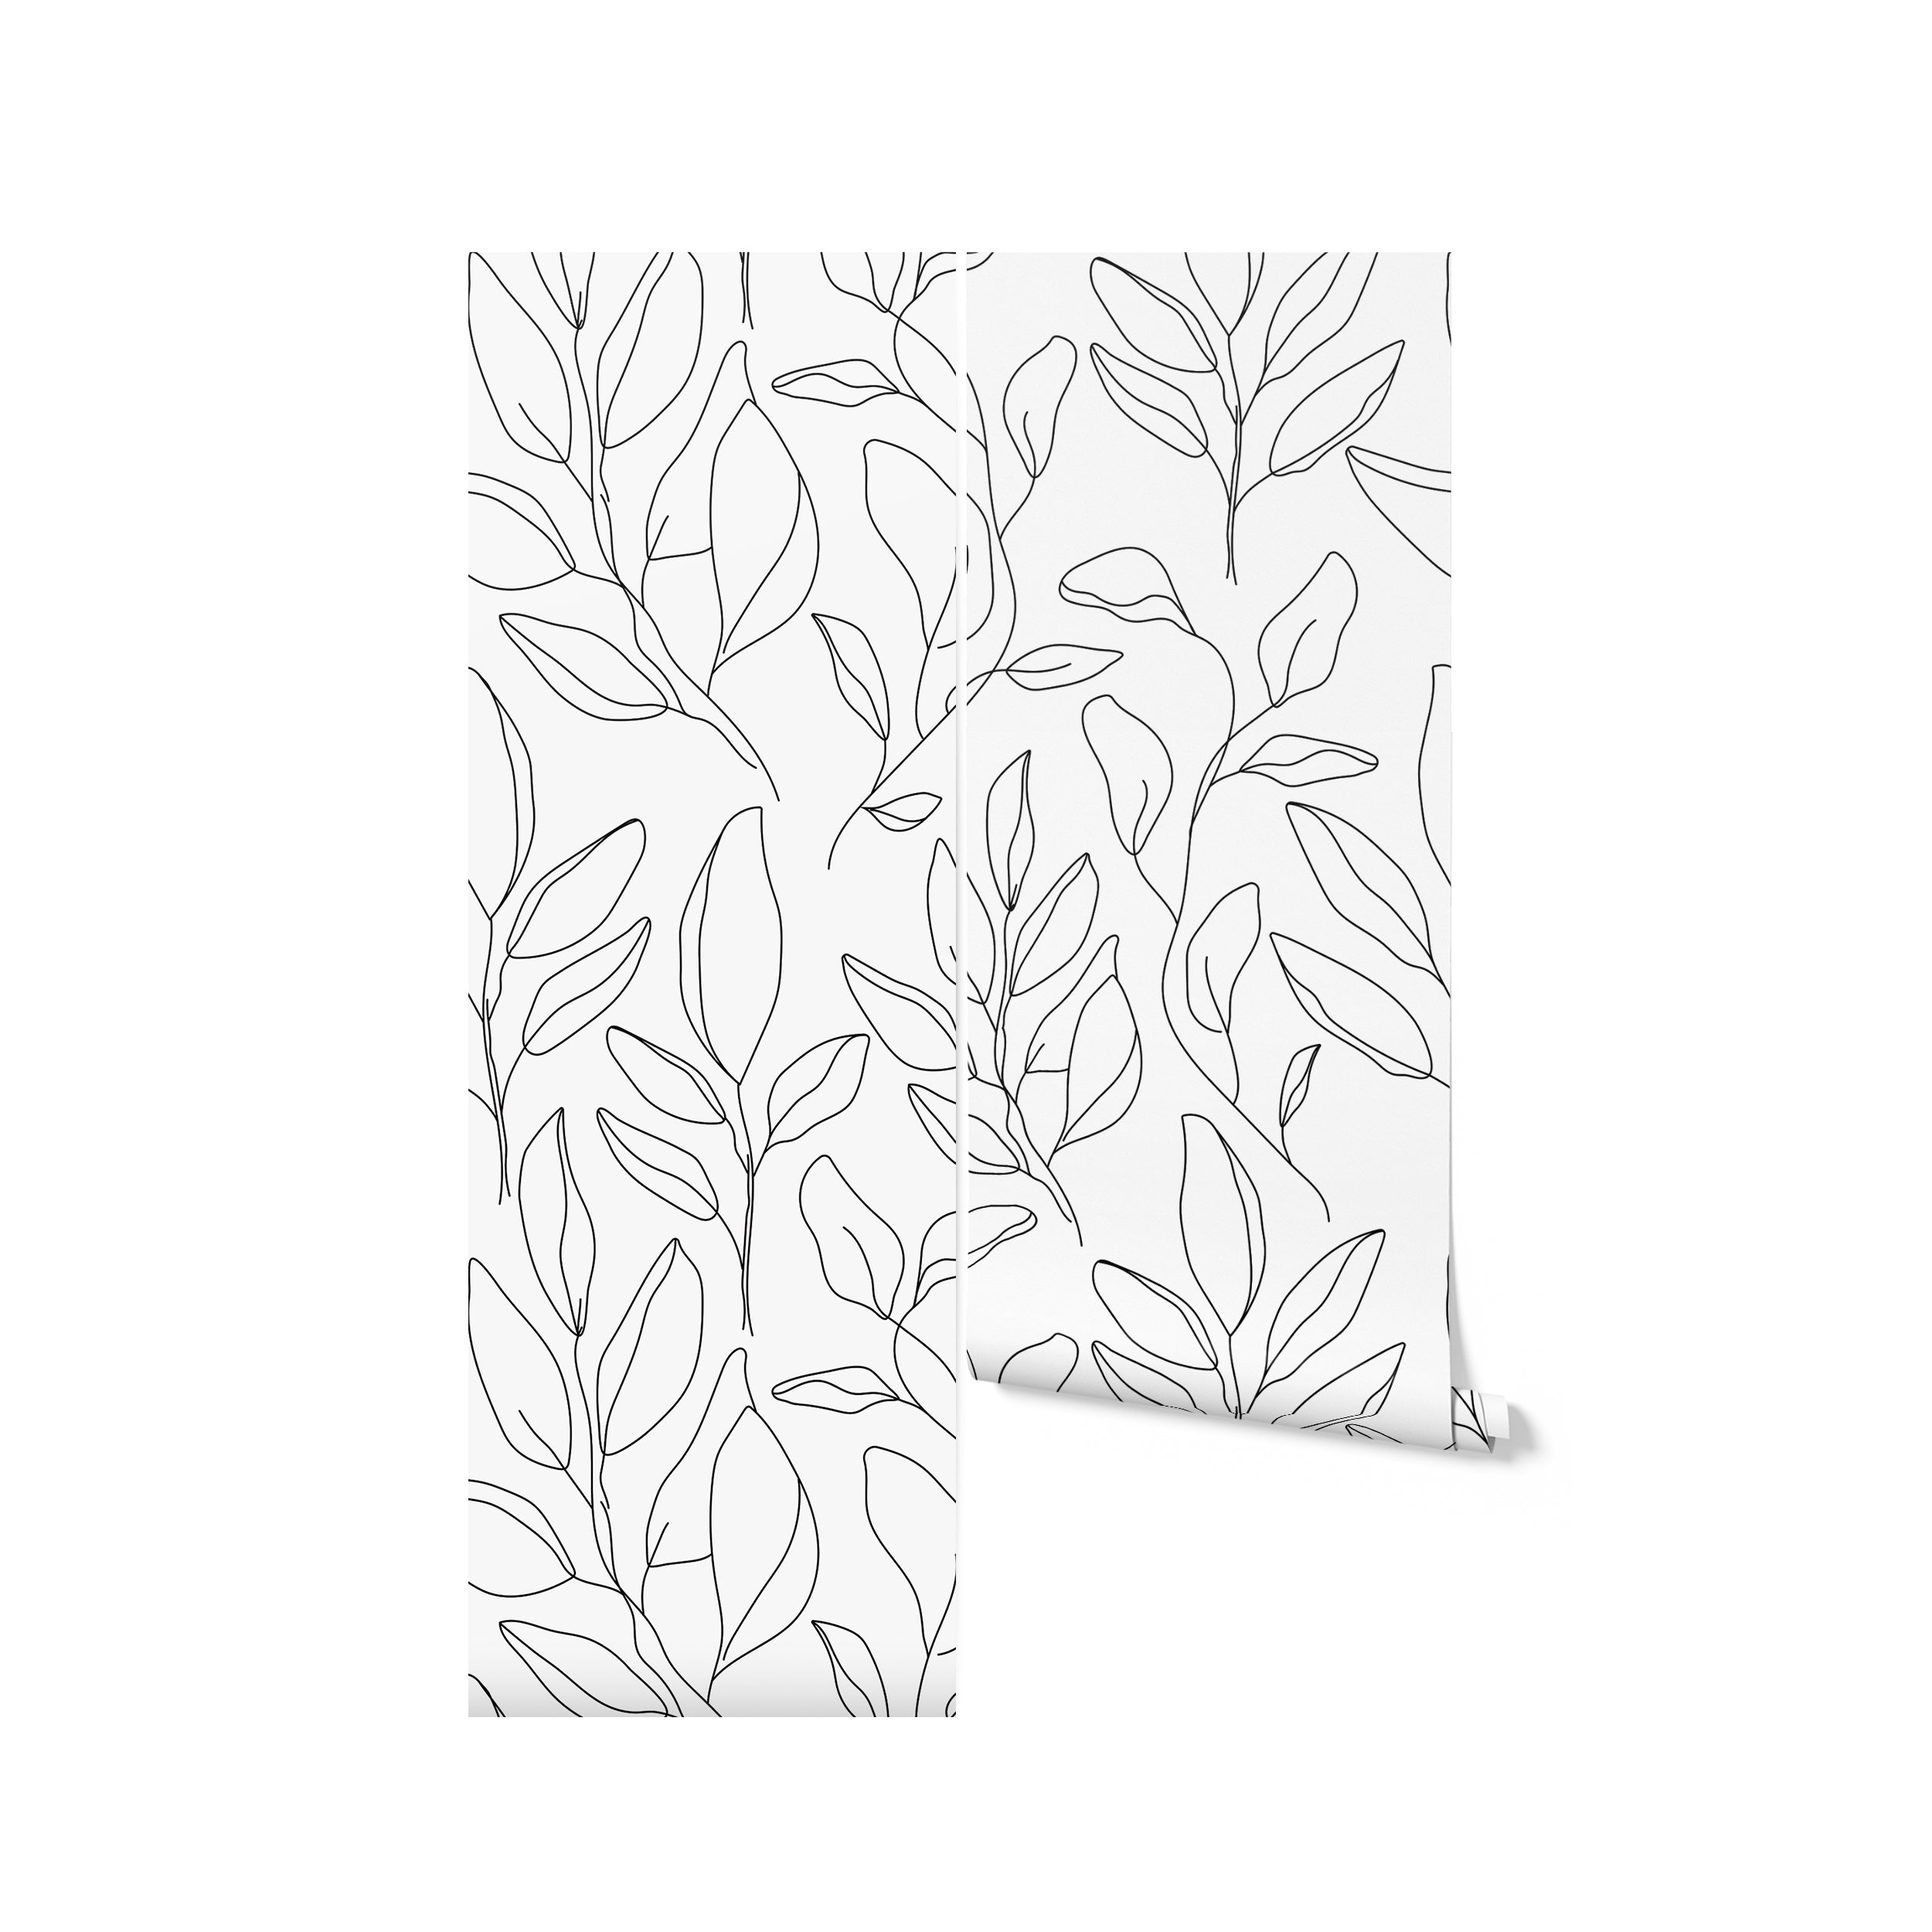 A mockup of a roll of white wallpaper with a black floral pattern, demonstrating the design and texture of the wallpaper.